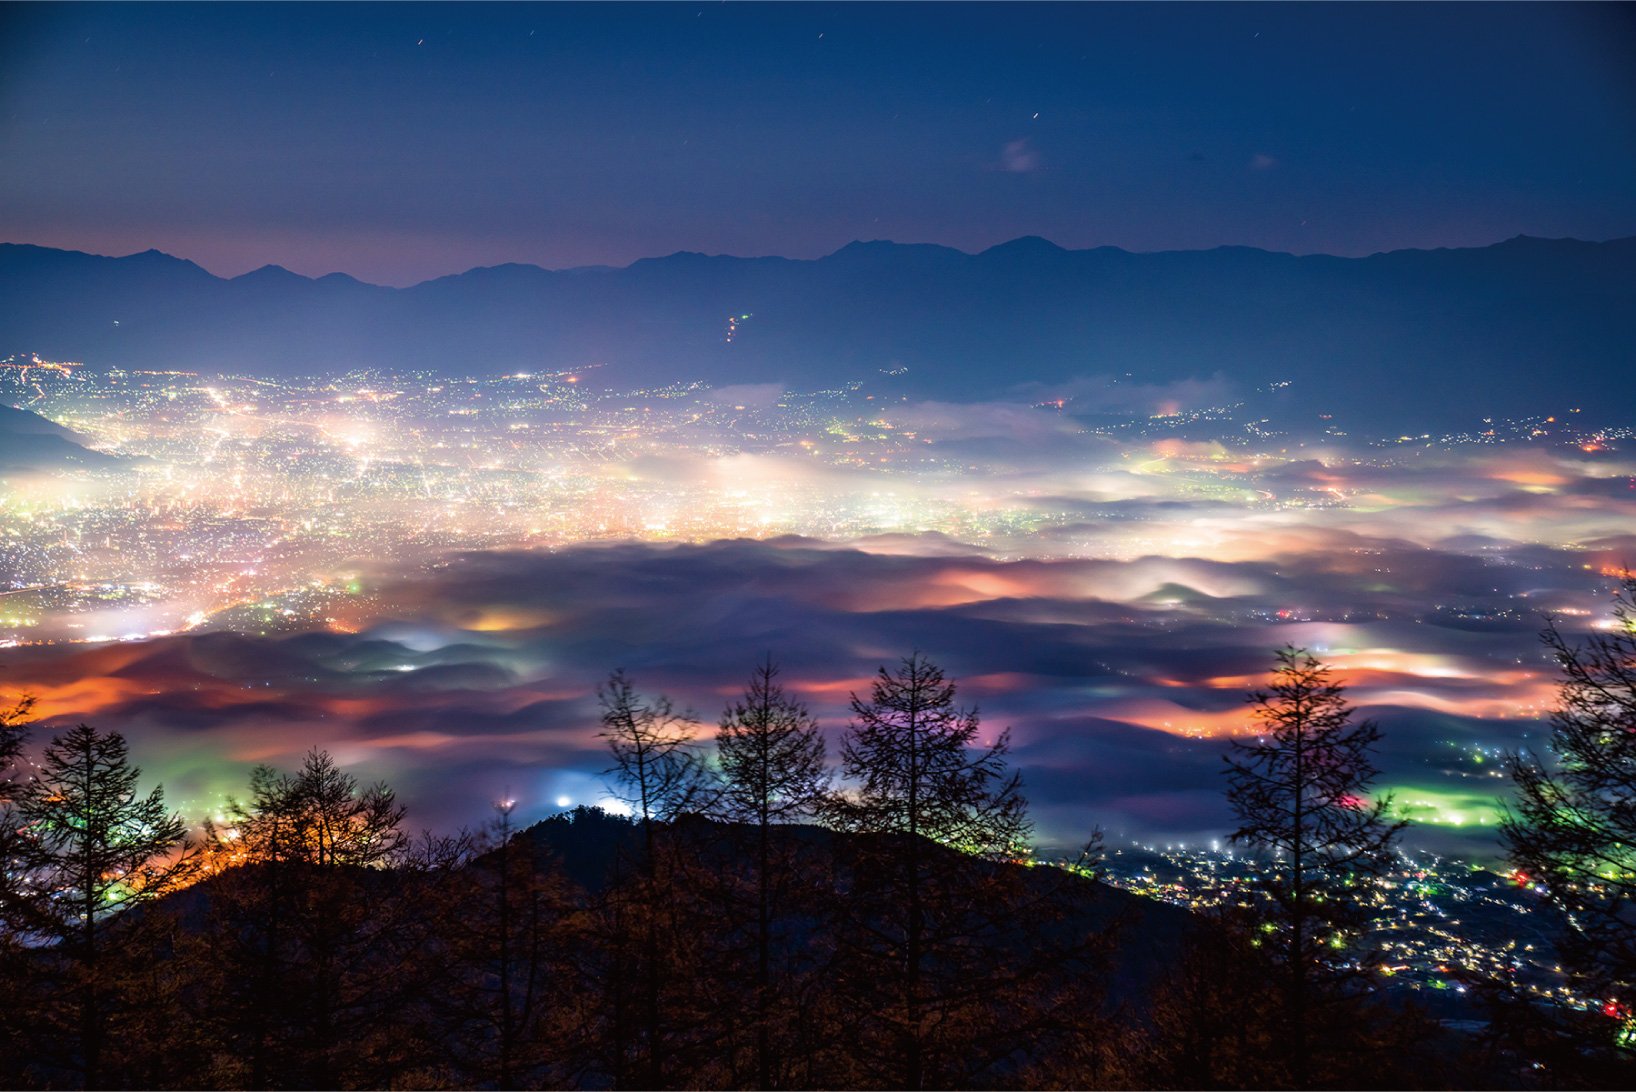 Take in a night view featured as one of the 100 landscapes of Japan